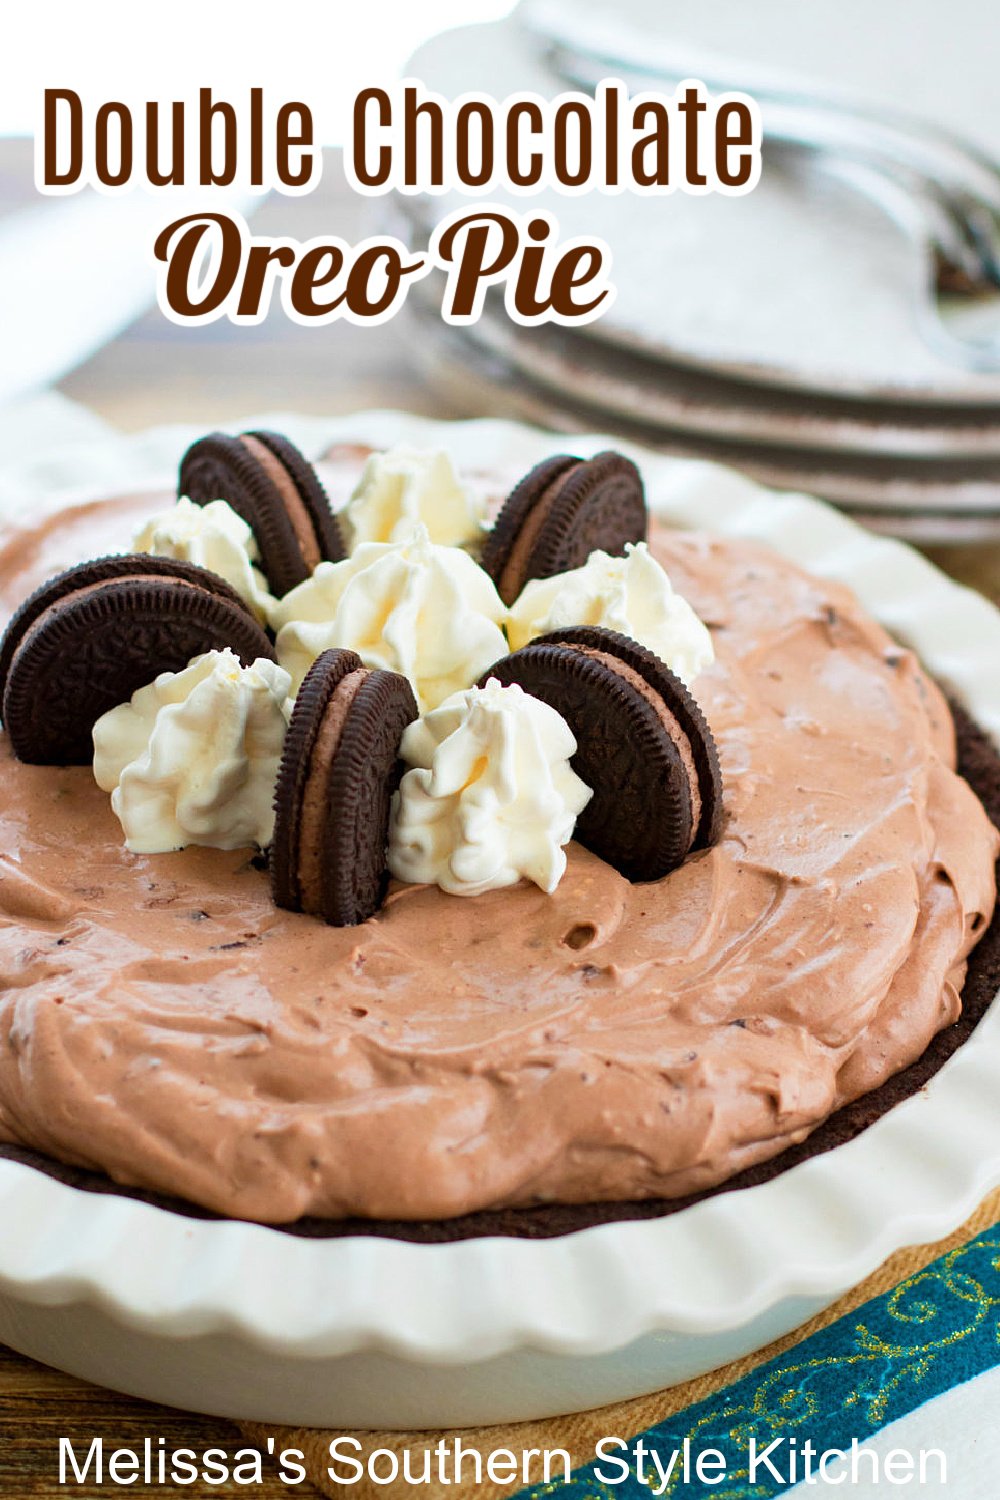 This creamy Double Chocolate Oreo Pie requires no cooking at all #doublechocolatepie #oreopie #nobakepierecipes #chocolate #desserts #dessertfoodrecipes #southernreipes #southernfood #Oreos #chocolatepie